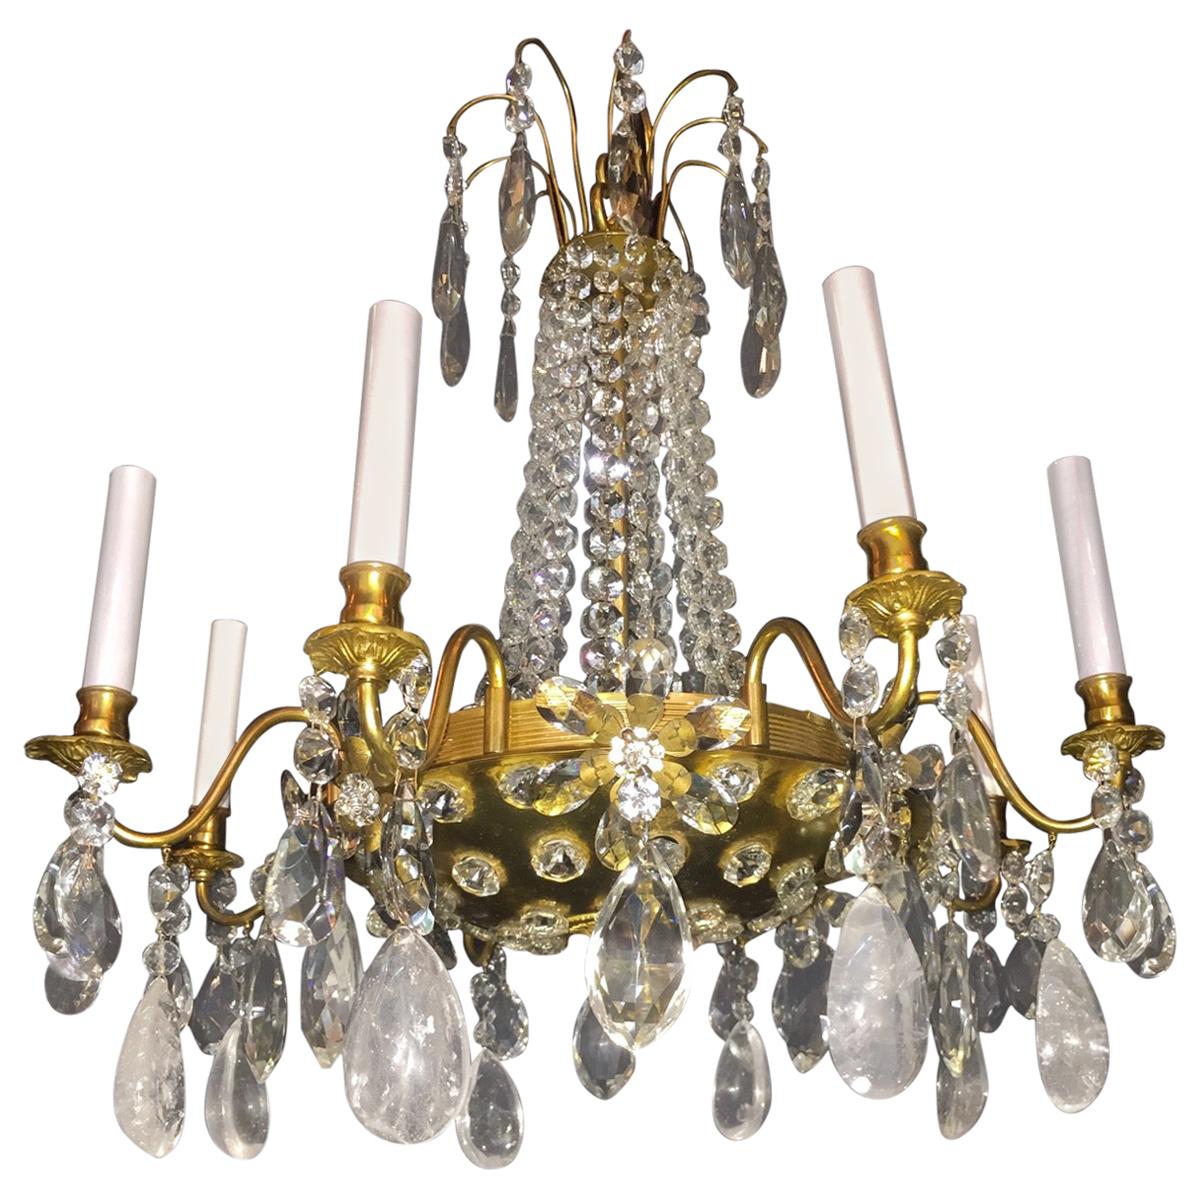 Pair of French Rock Crystal and Gilt Bronze Chandeliers